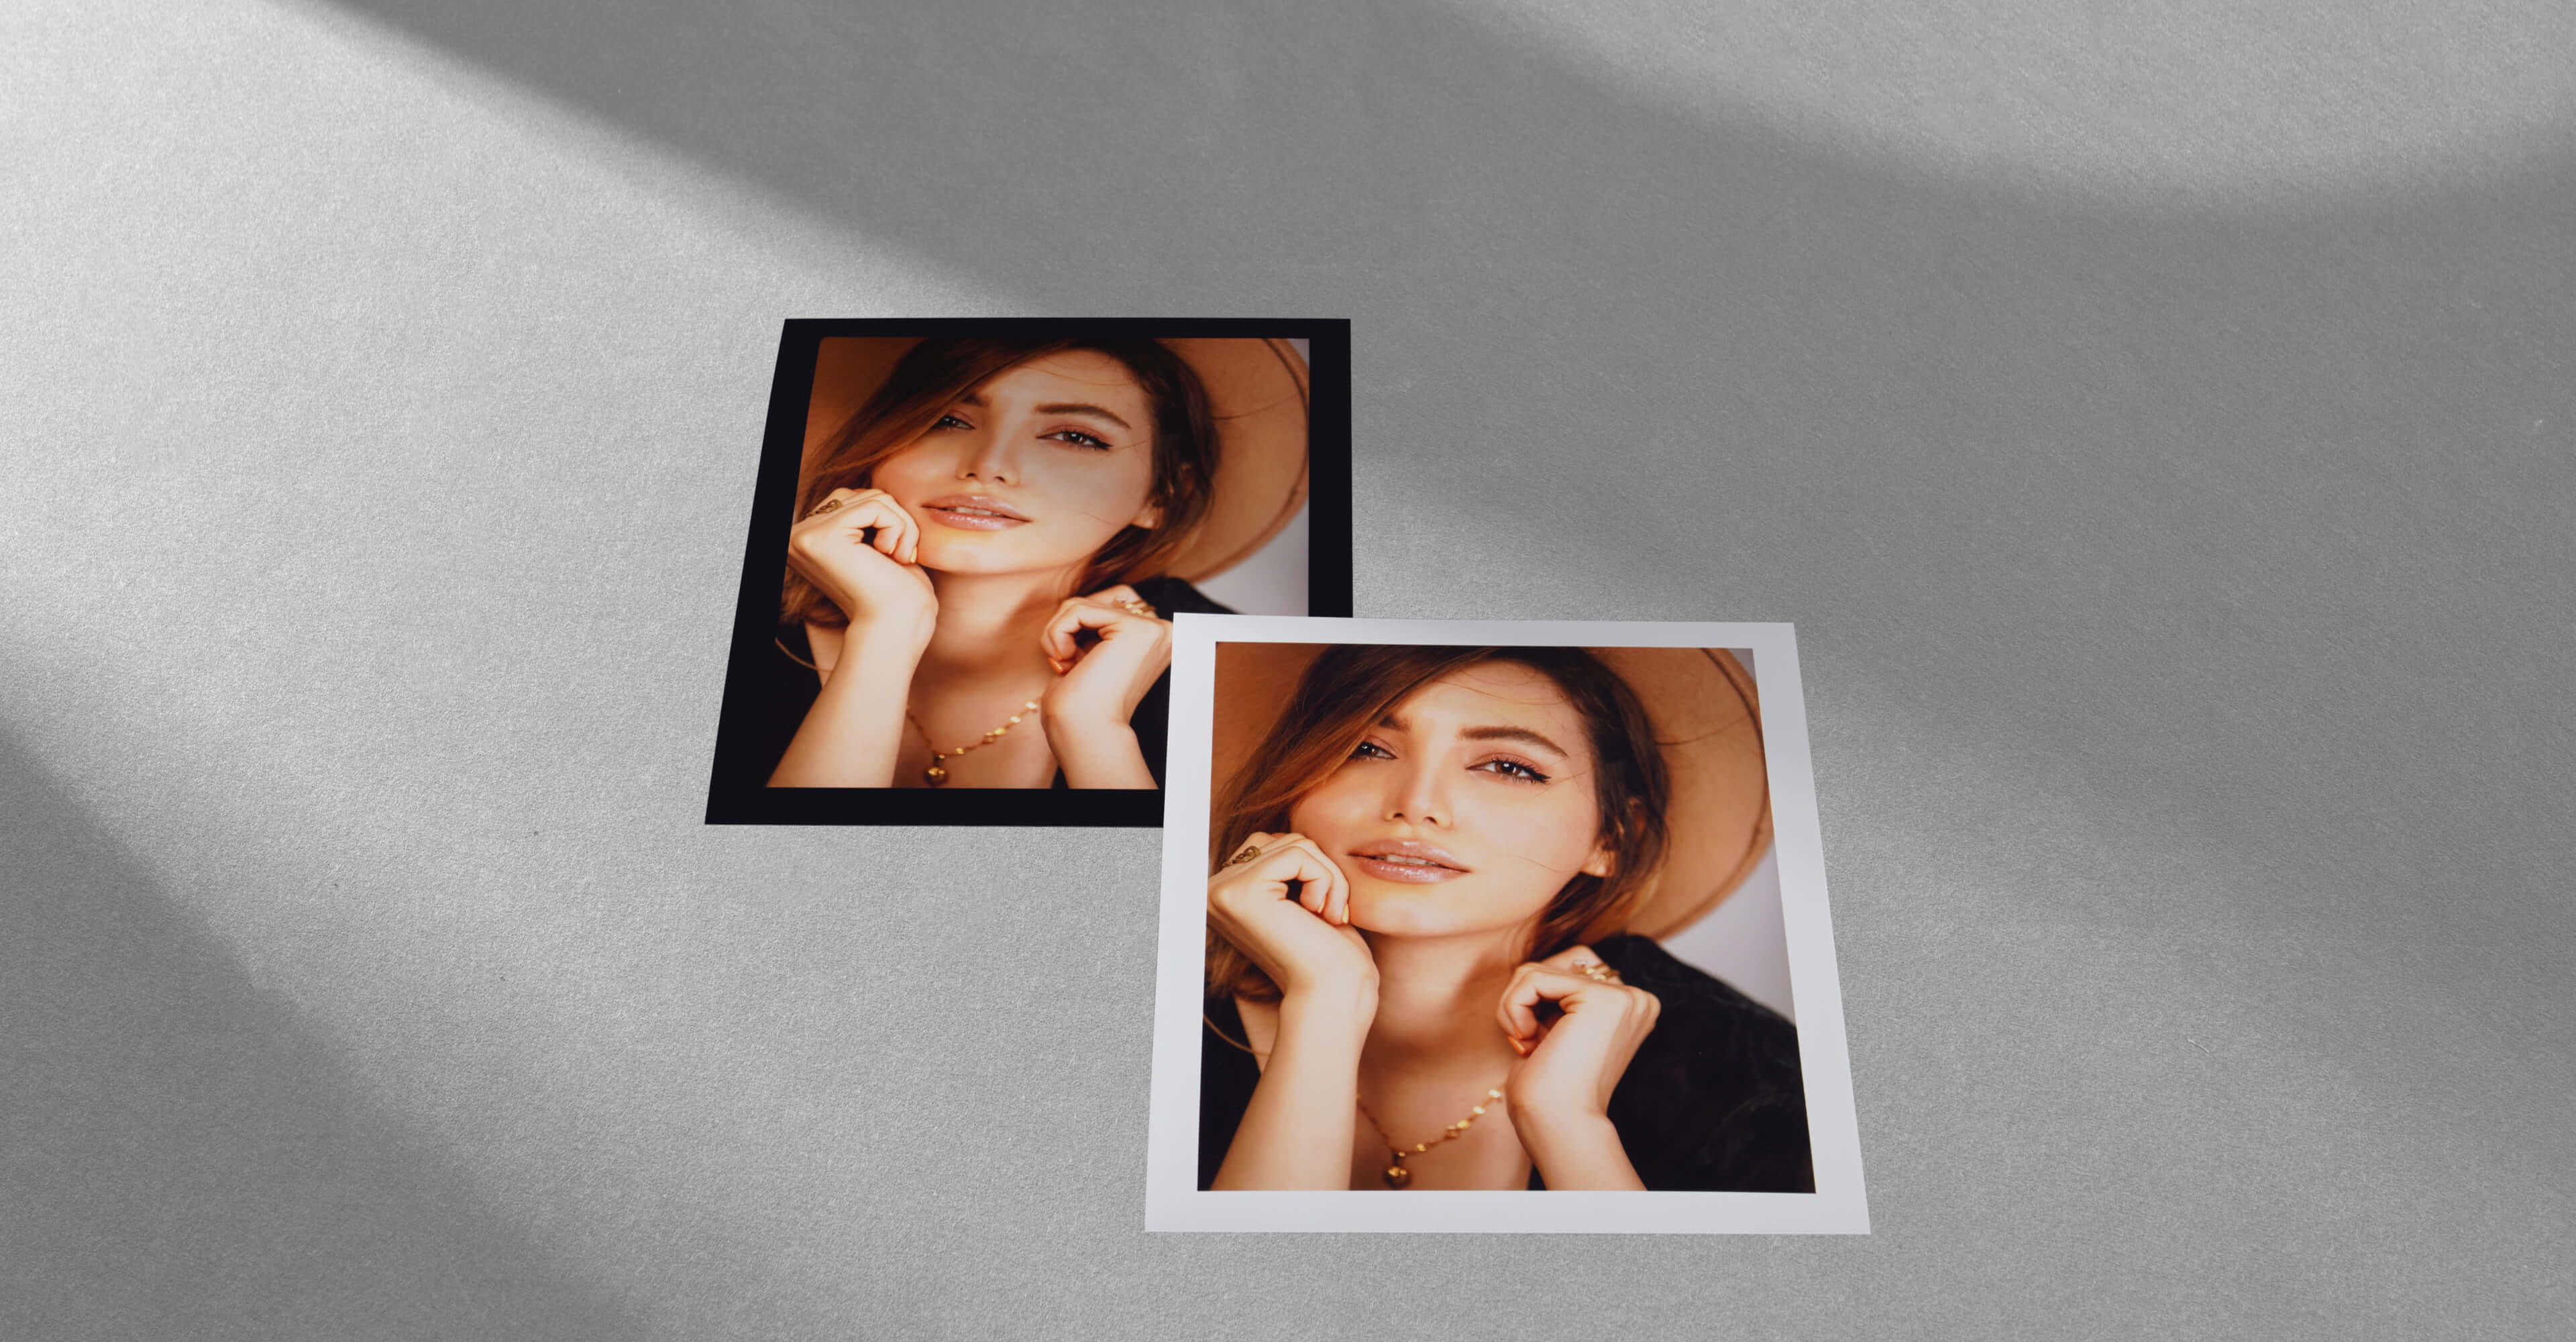 photo prints showing two photos of the same woman with different border colors